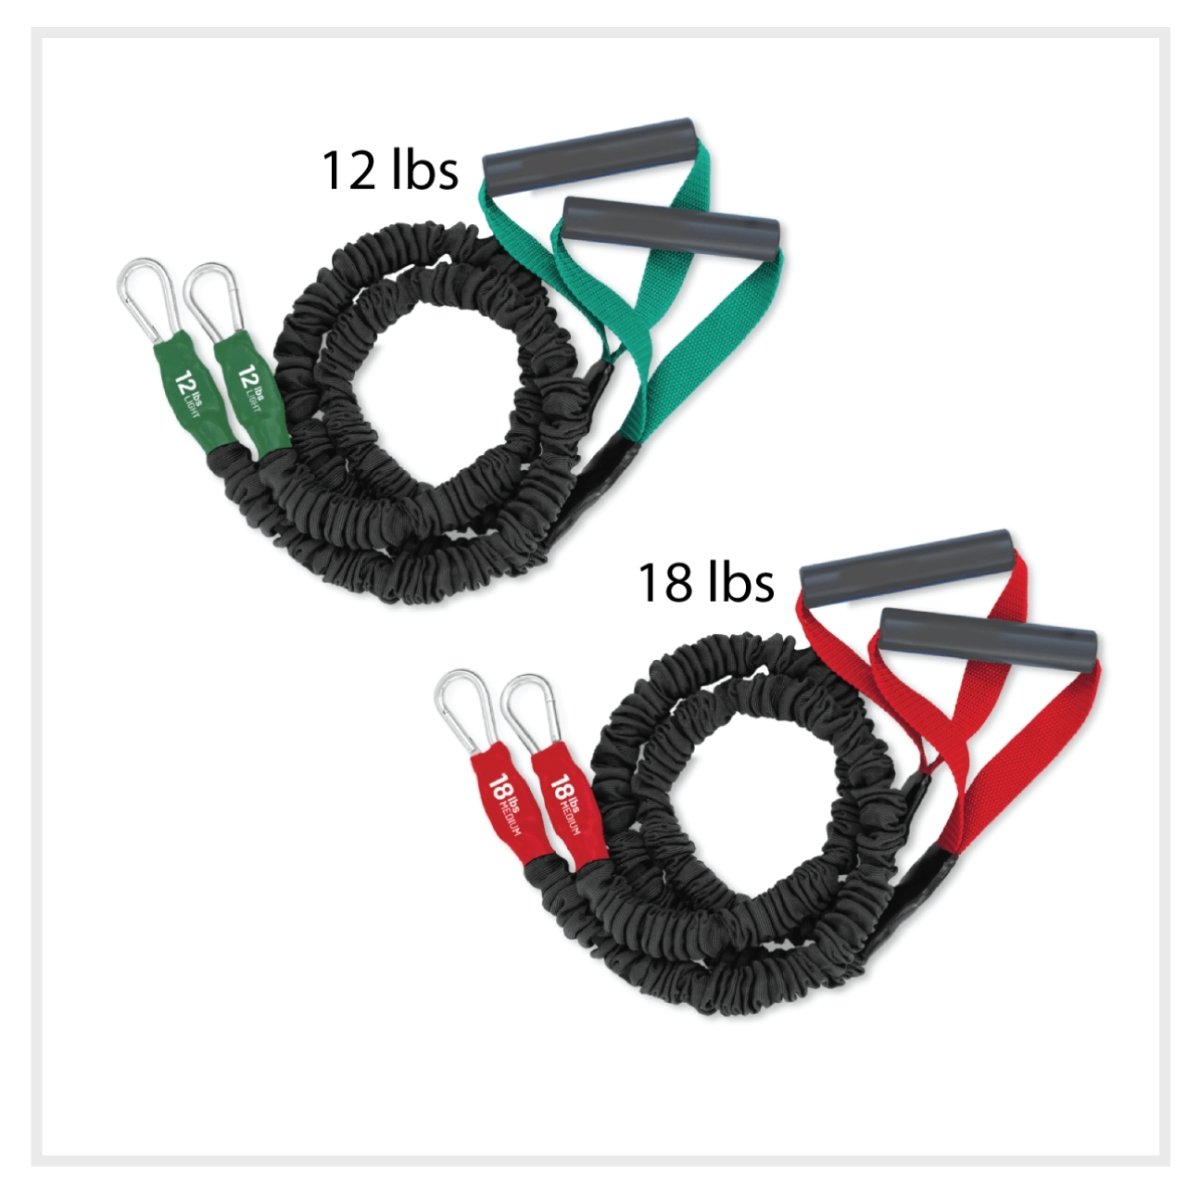 BEST SHOULDER AND ARM RESISTANCE BANDS FOR CROSSFIT, WEIGHT LIFTING, SPORTS, AND BODY BUILDING TO SUPPORT THE SHOULDER AND ARM, BUILD STRENGTH, PREVENT INJURY AND DEFINE SHOULDERS AND UPPER BODY, NOT TO MENTION REHABILITATION FROM INJURY OR SURGERY Crossover Symmetry